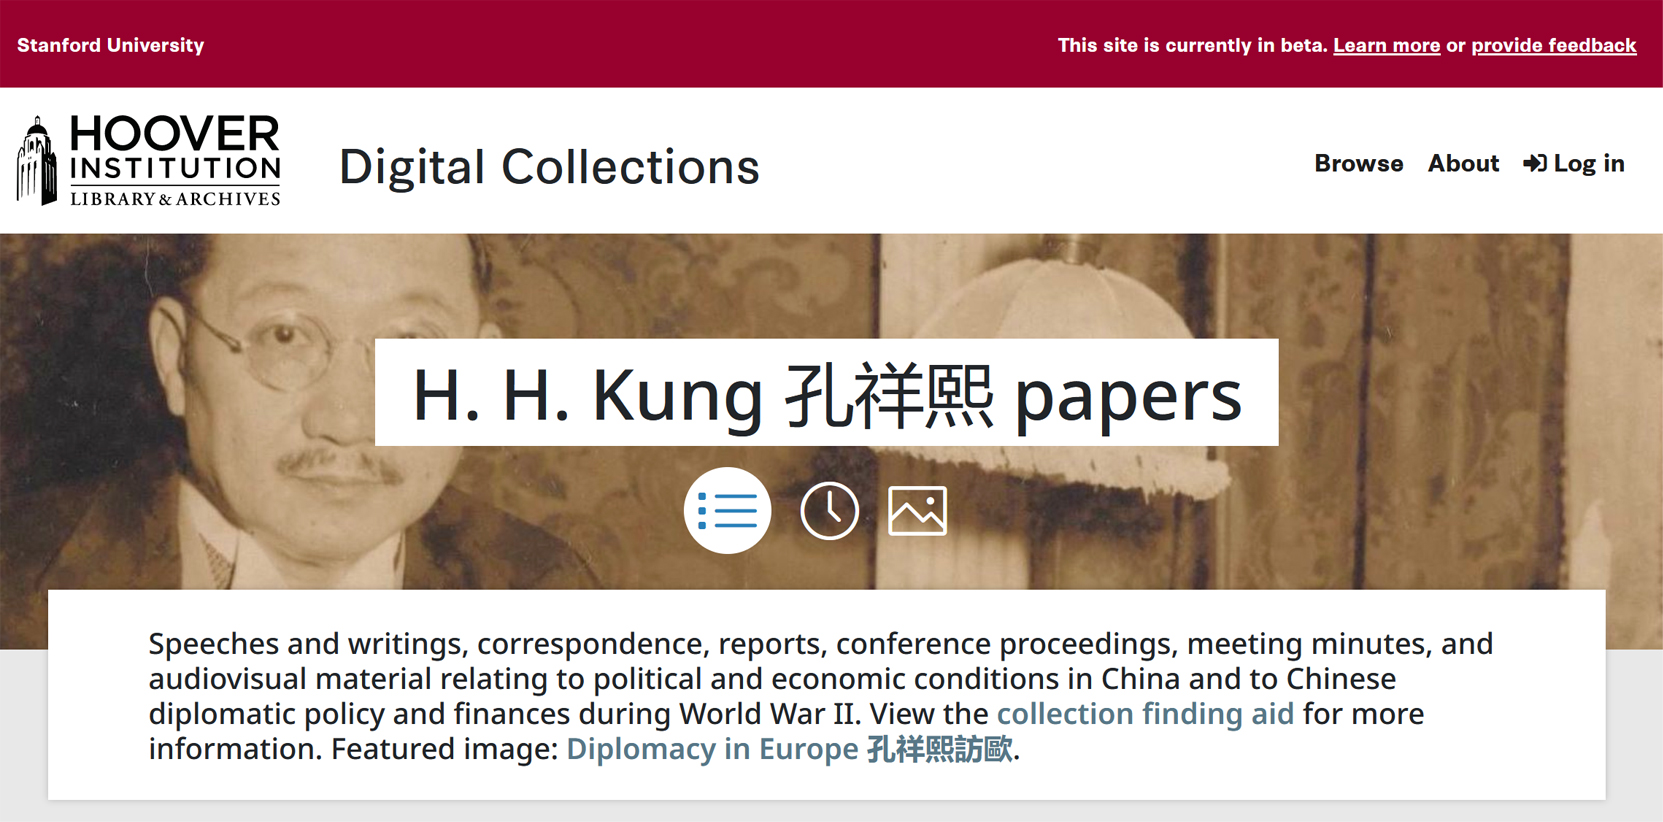 L&A Digital Collections site - H.H. Kung papers